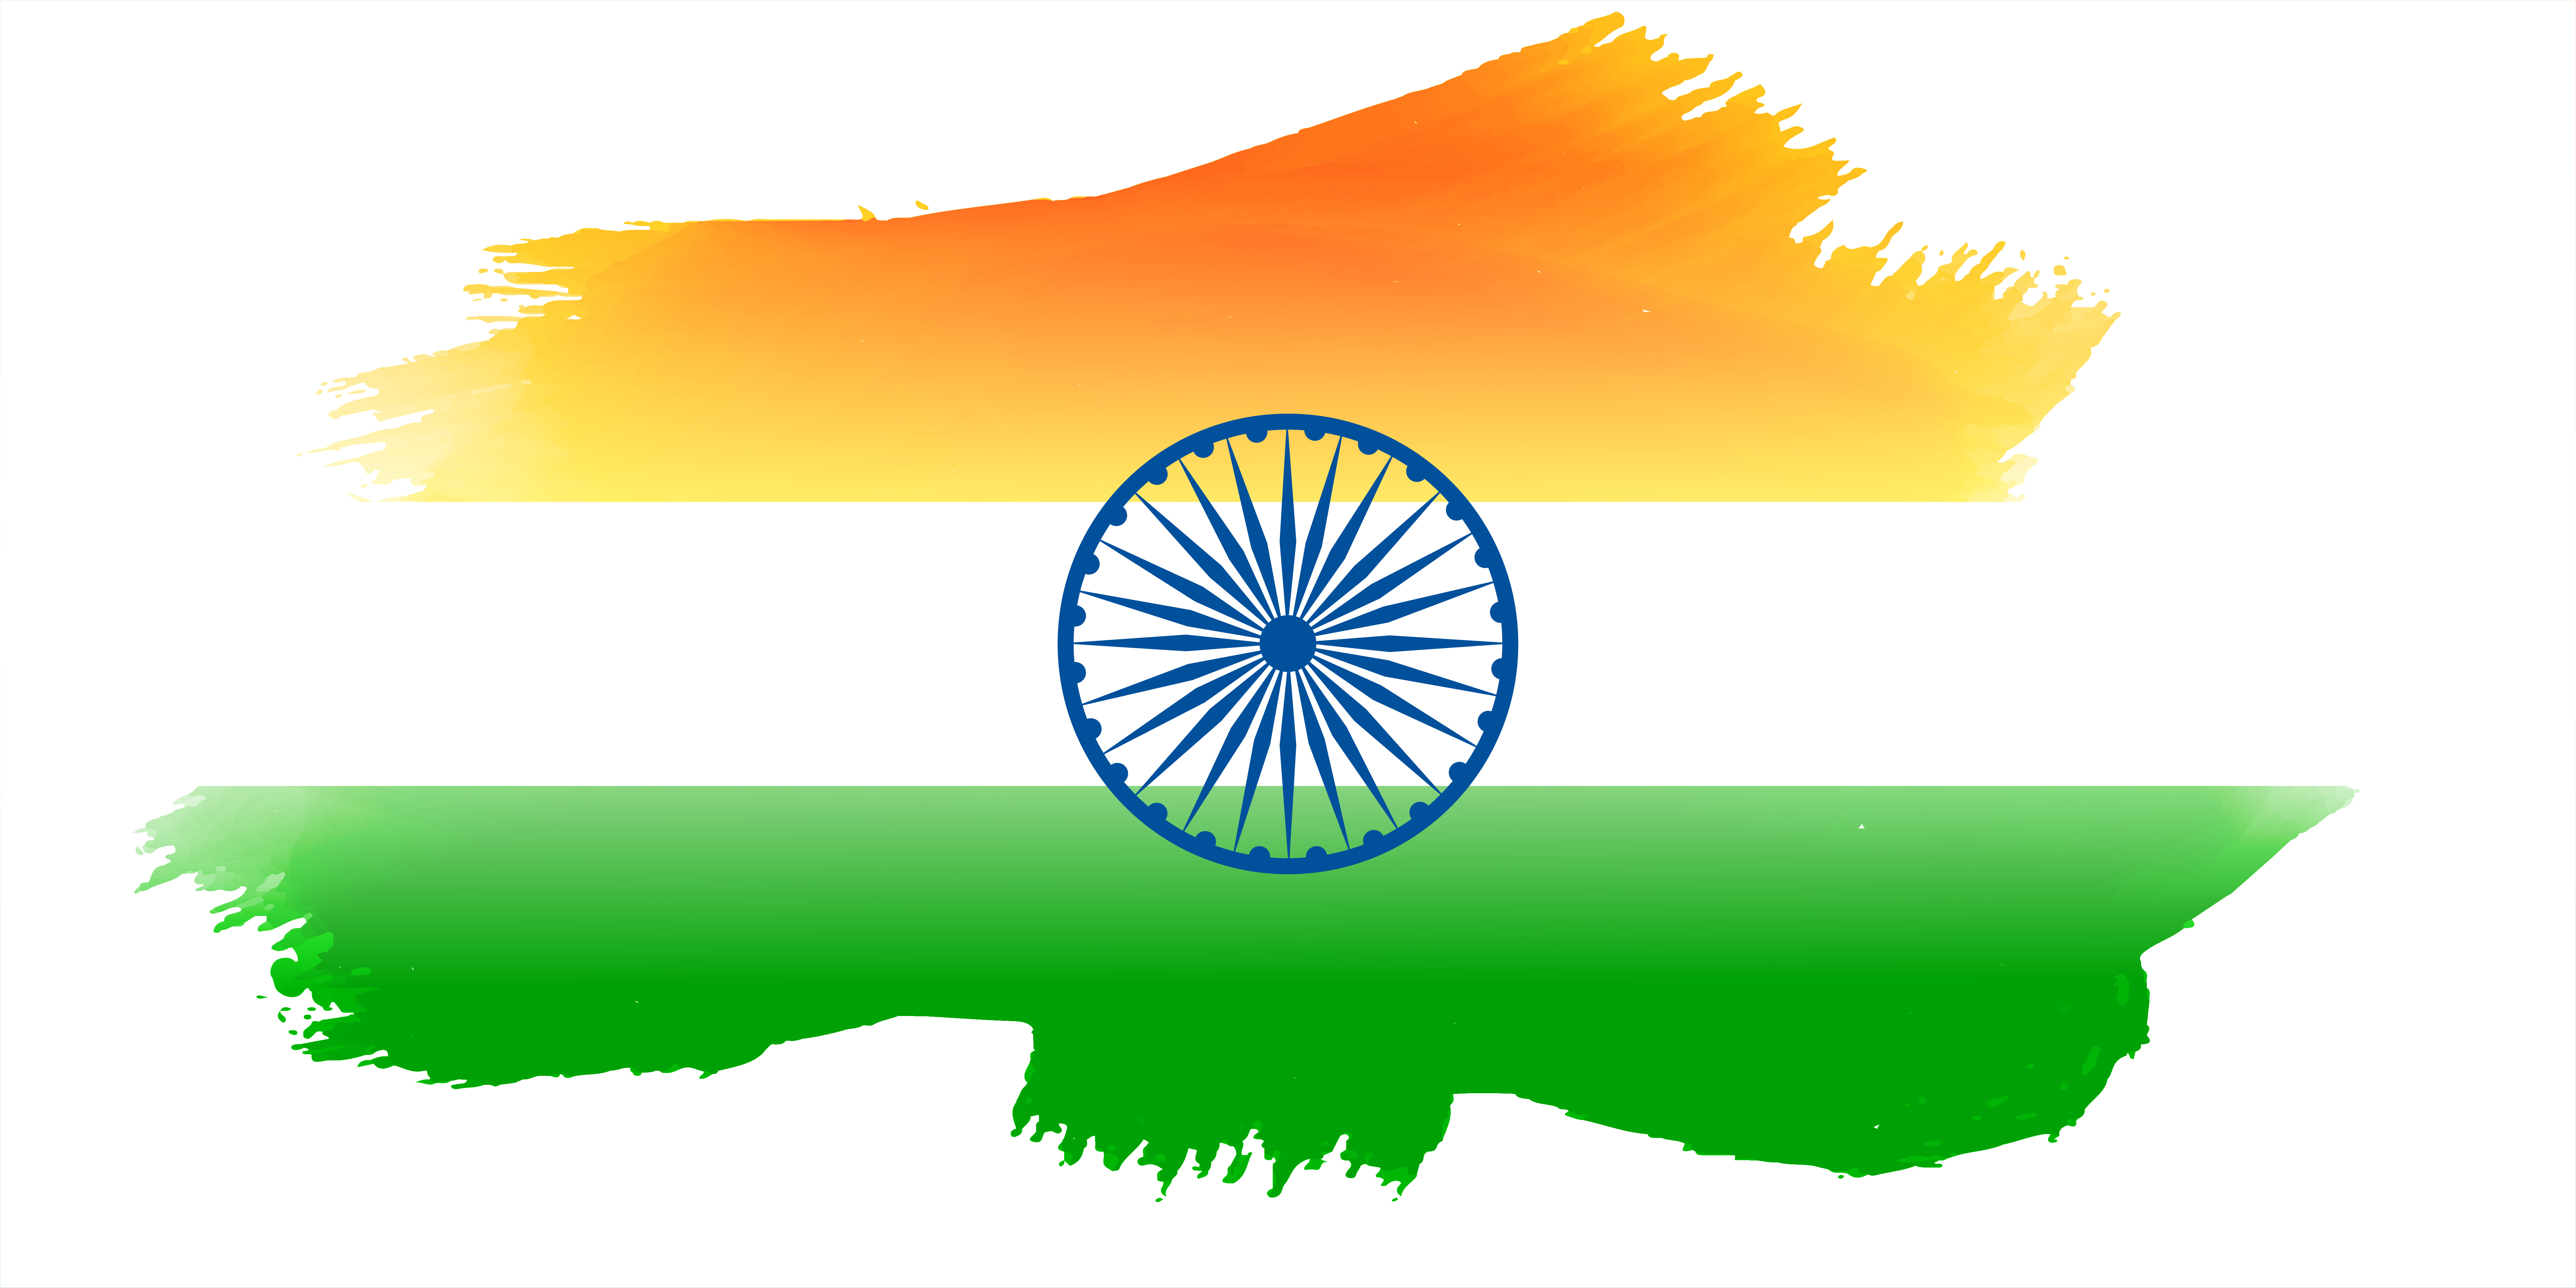 Download indian flag made with watercolor - Download Free Vector ...